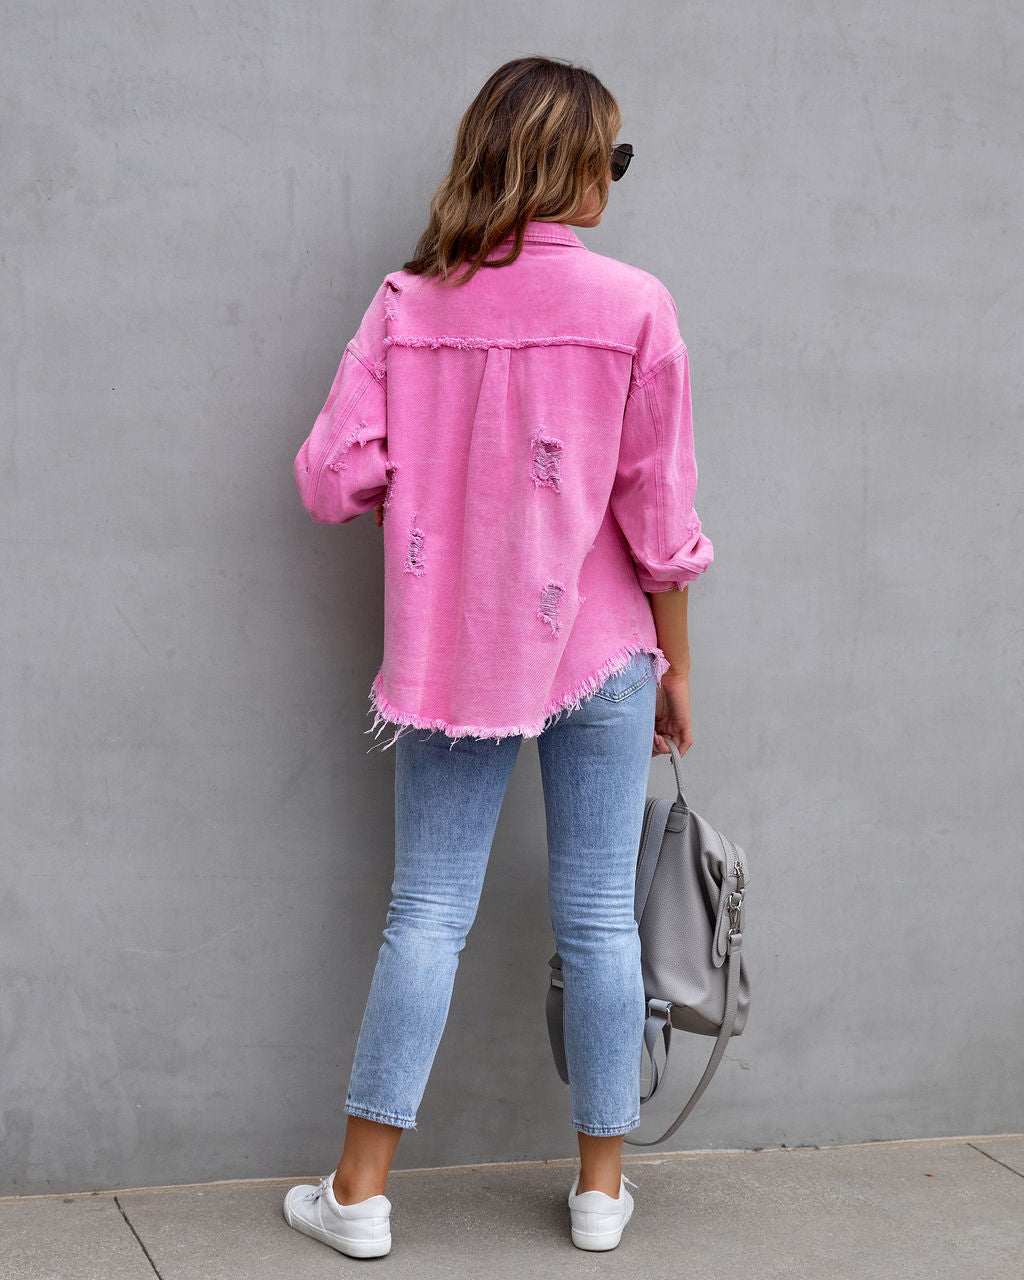 Ripped Shirt Jacket for Women - Perfect for Autumn and Spring